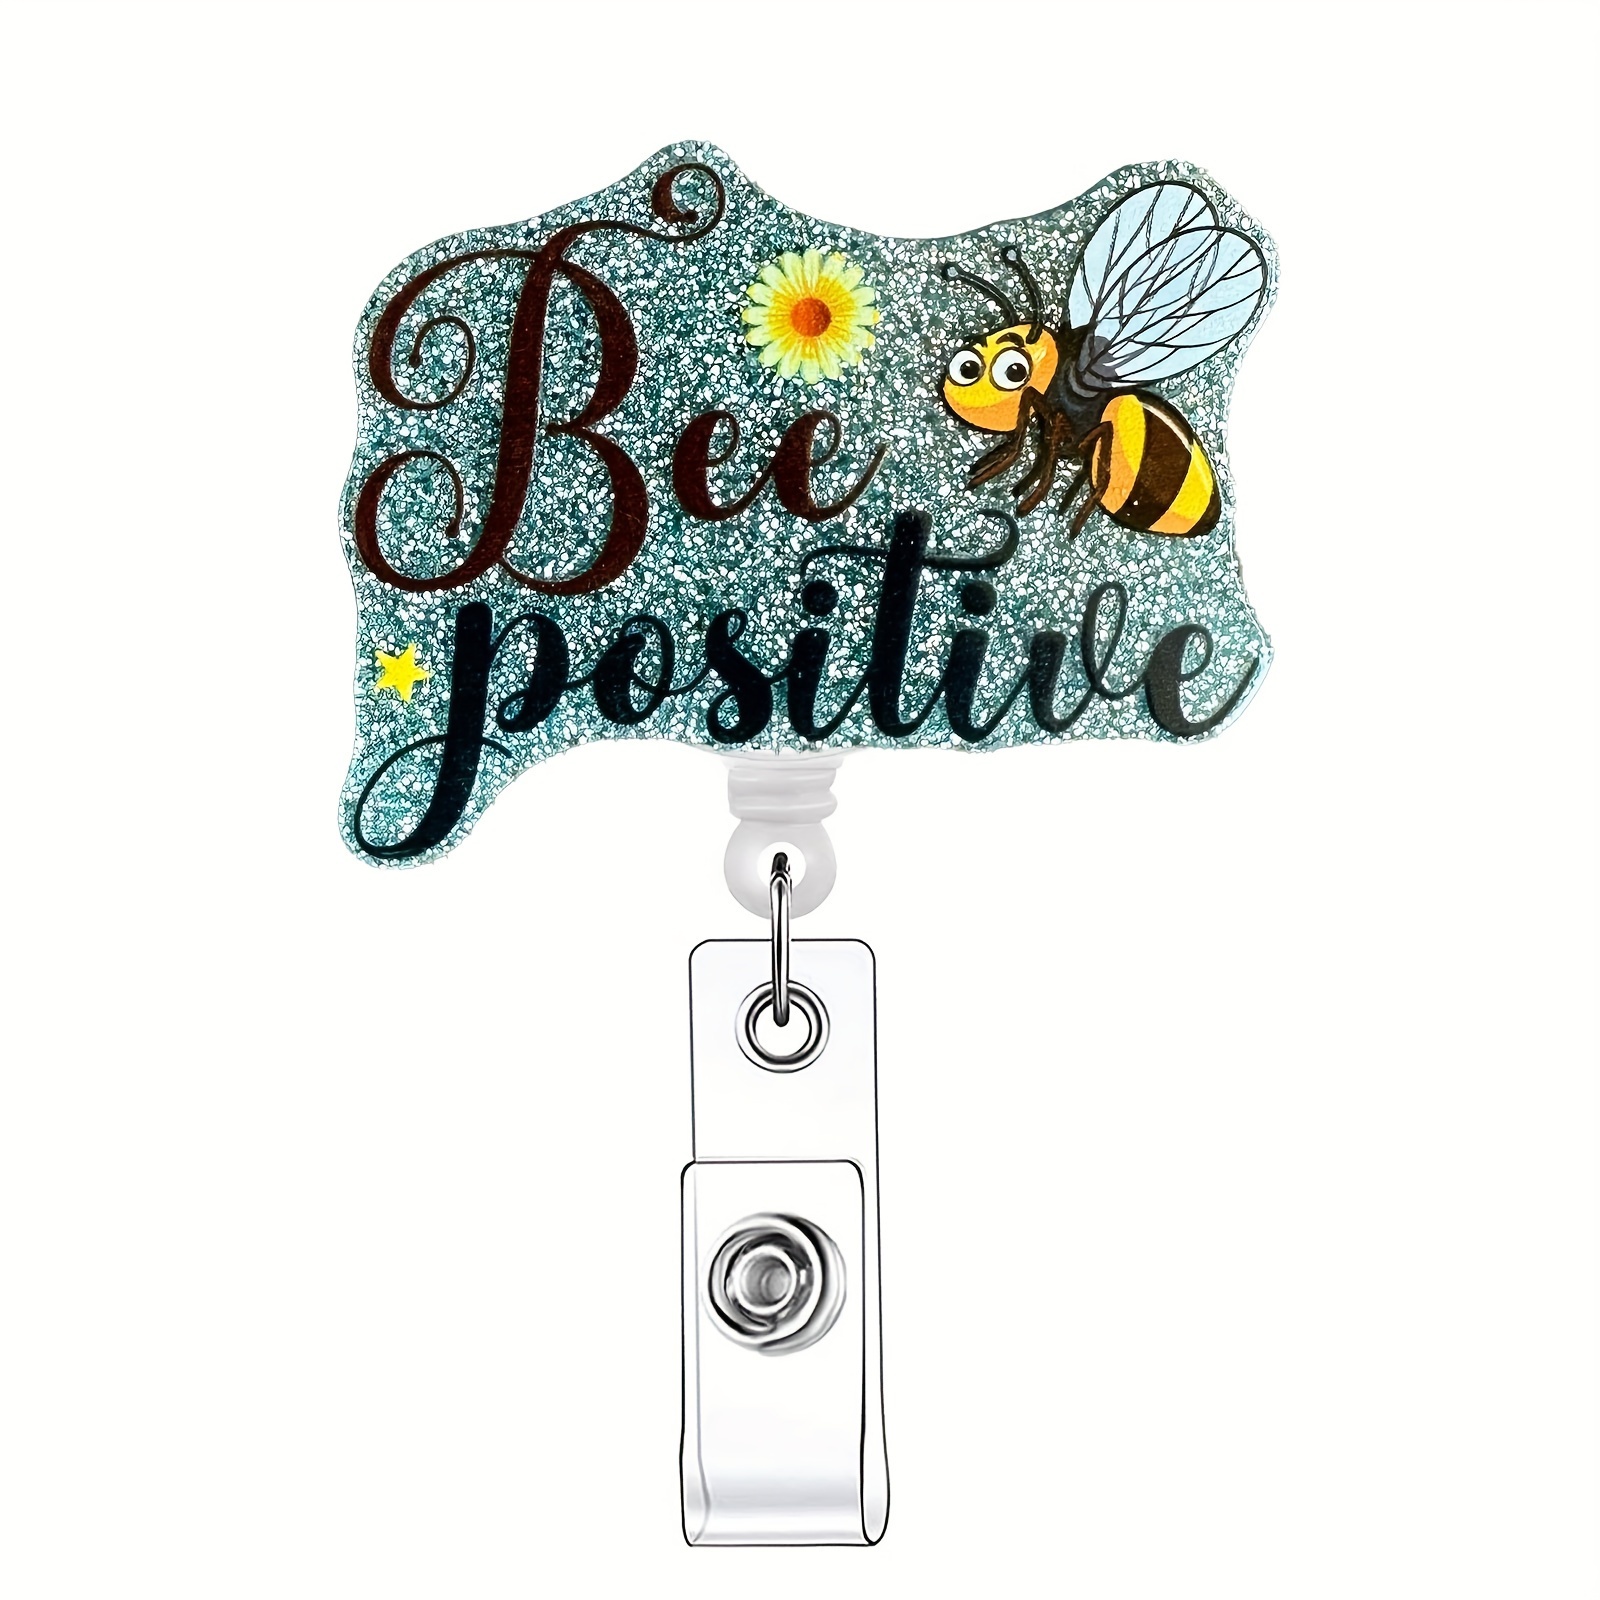 1pc Bee Themed Retractable Badge Reel,Name Badge Holder with ID Clip for Nurse Doctor Volunteer Employee,Cat,Car,Flower,Flowers,Valentine's Day